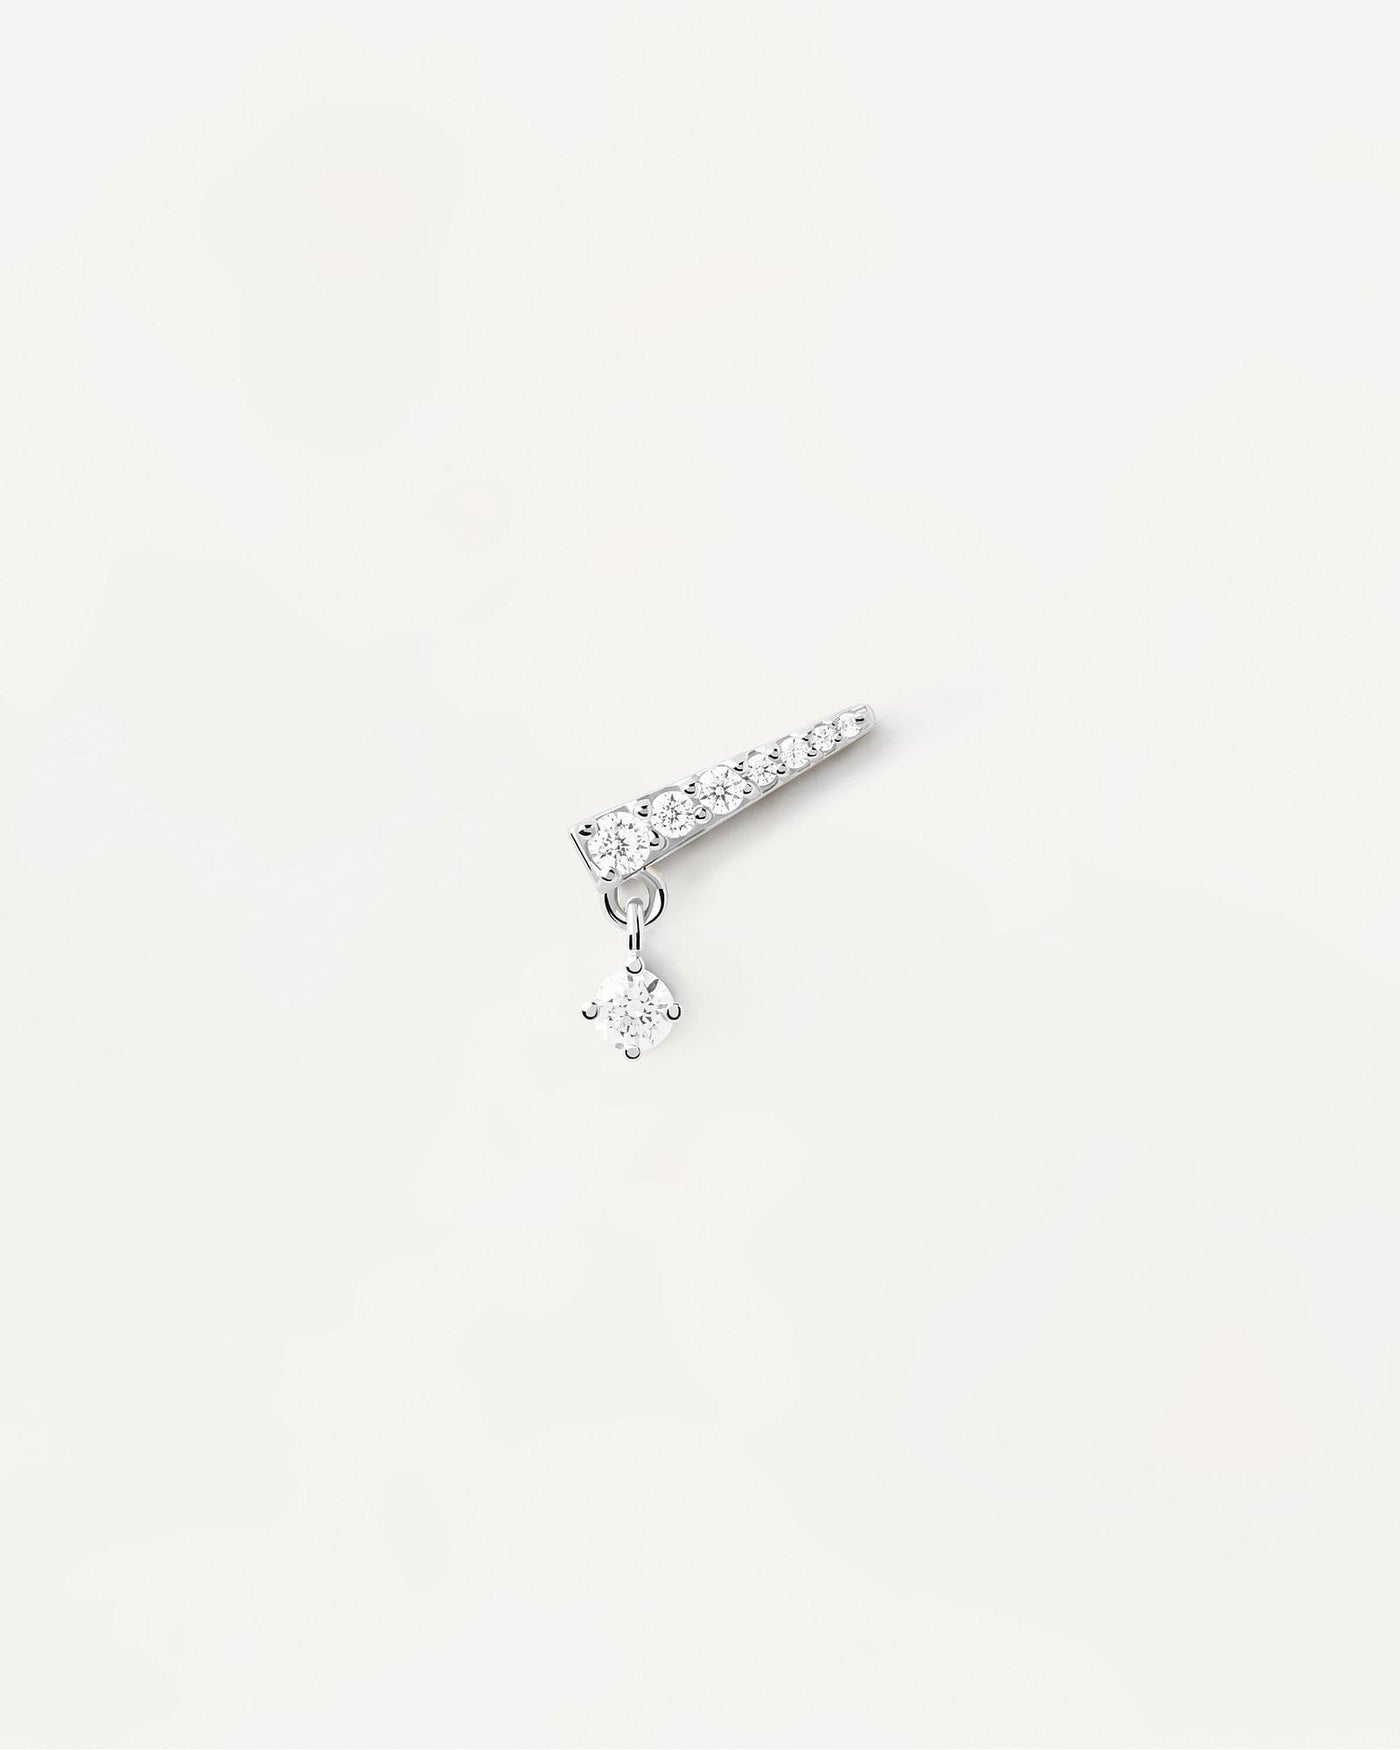 2024 Selection | Ava Single Silver Earring. Sterling silver ear piercing in point shape with white zirconia. Get the latest arrival from PDPAOLA. Place your order safely and get this Best Seller. Free Shipping.